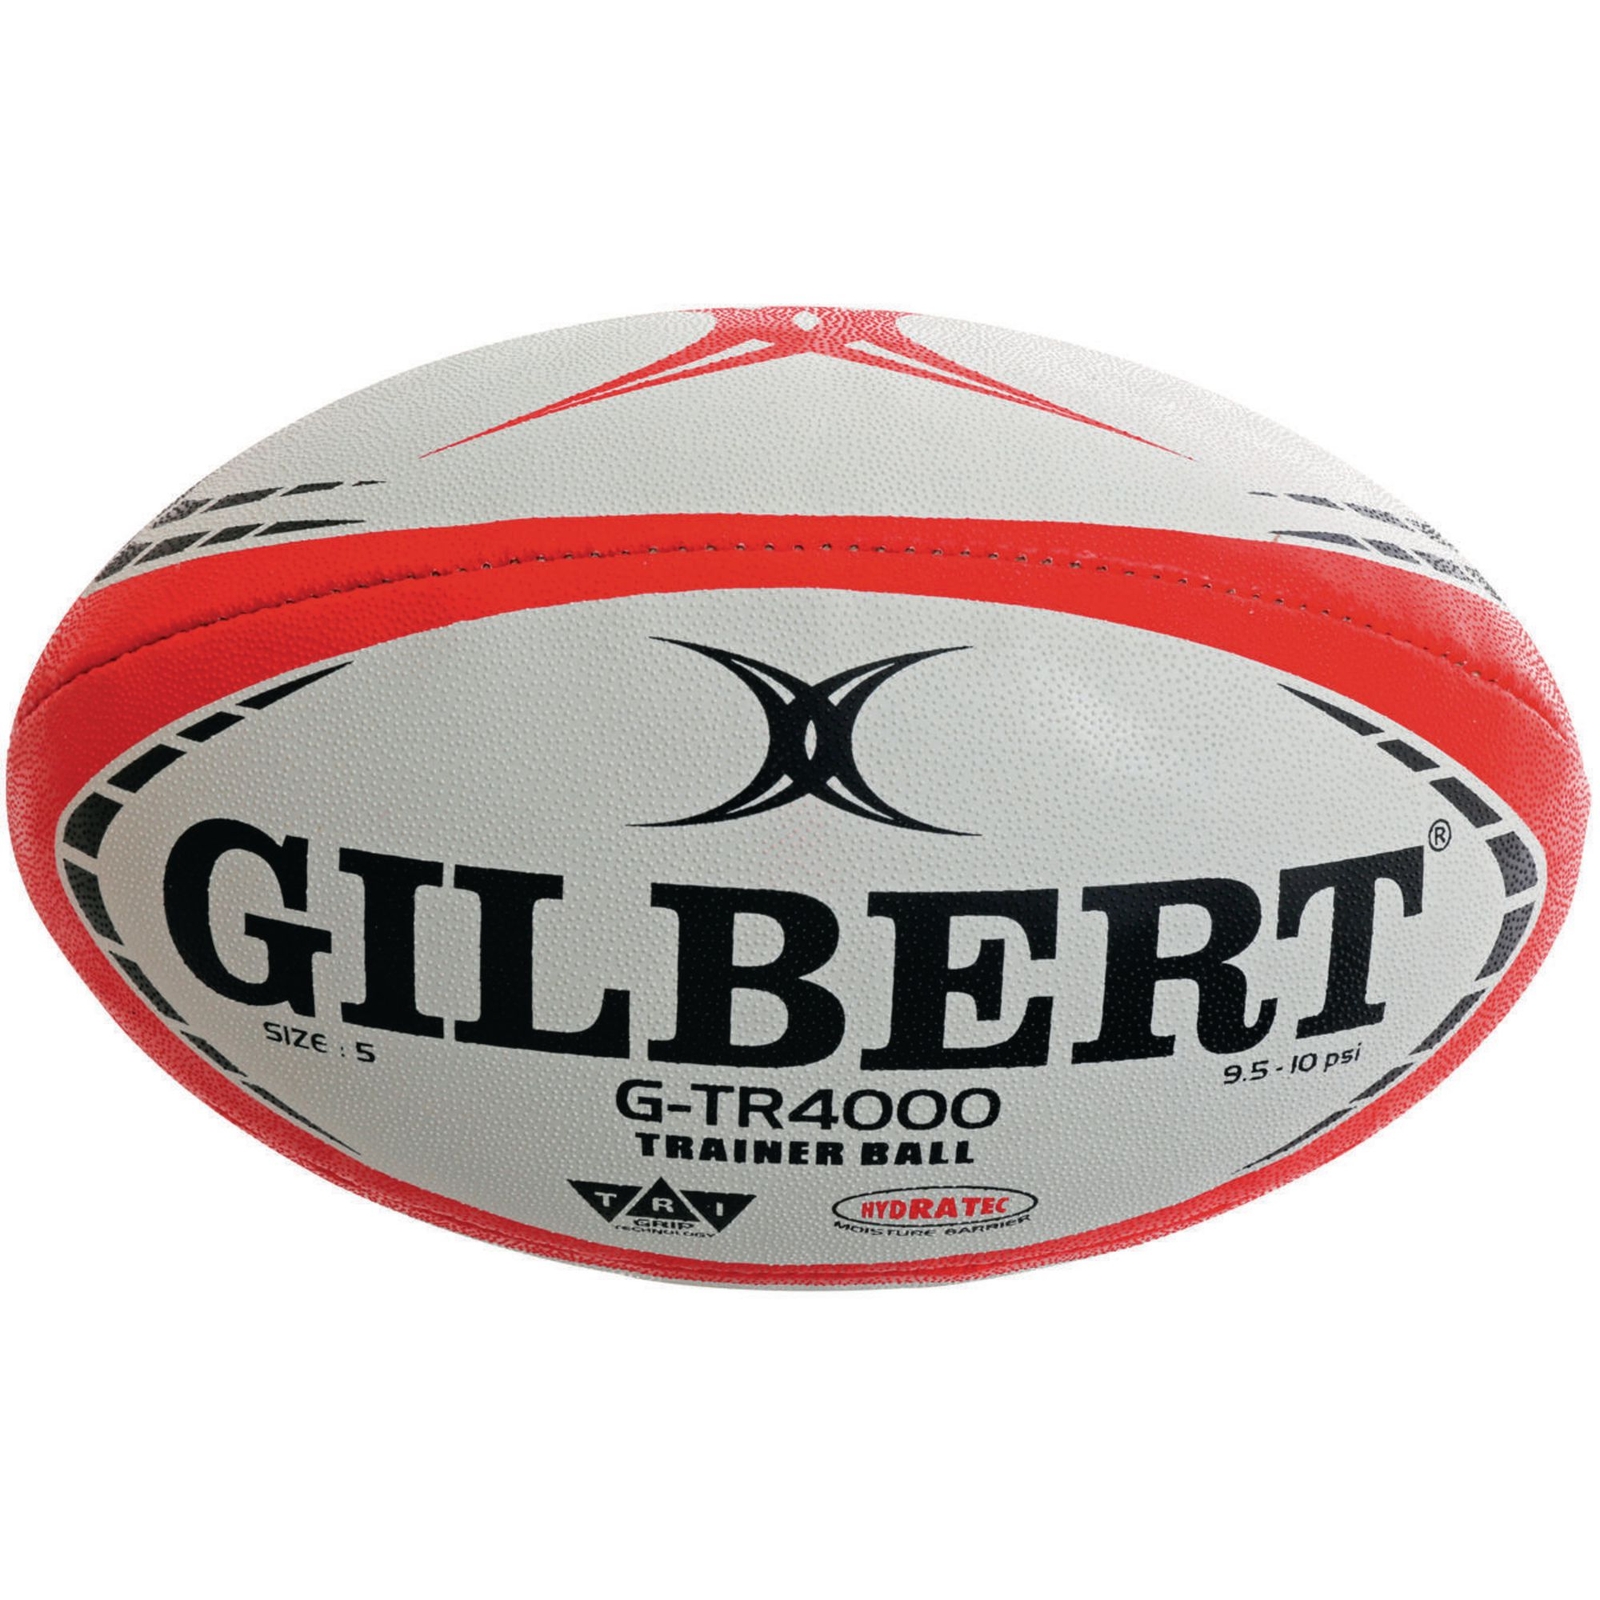 Gilbert G-TR4000 Trainer Rugby Ball, White Red - Size 5